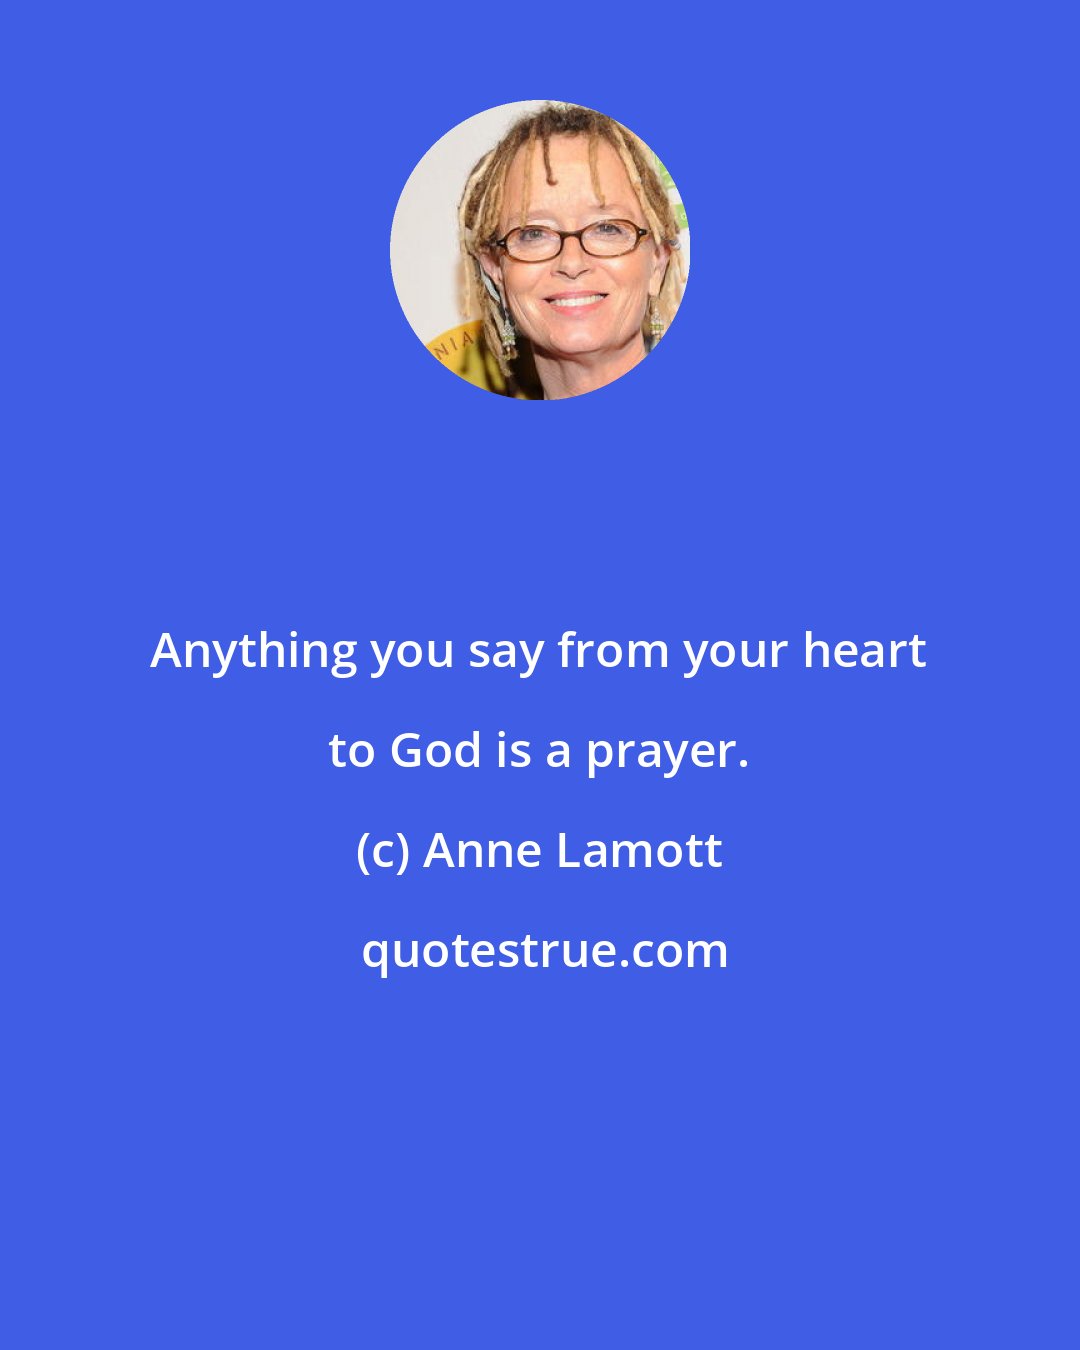 Anne Lamott: Anything you say from your heart to God is a prayer.